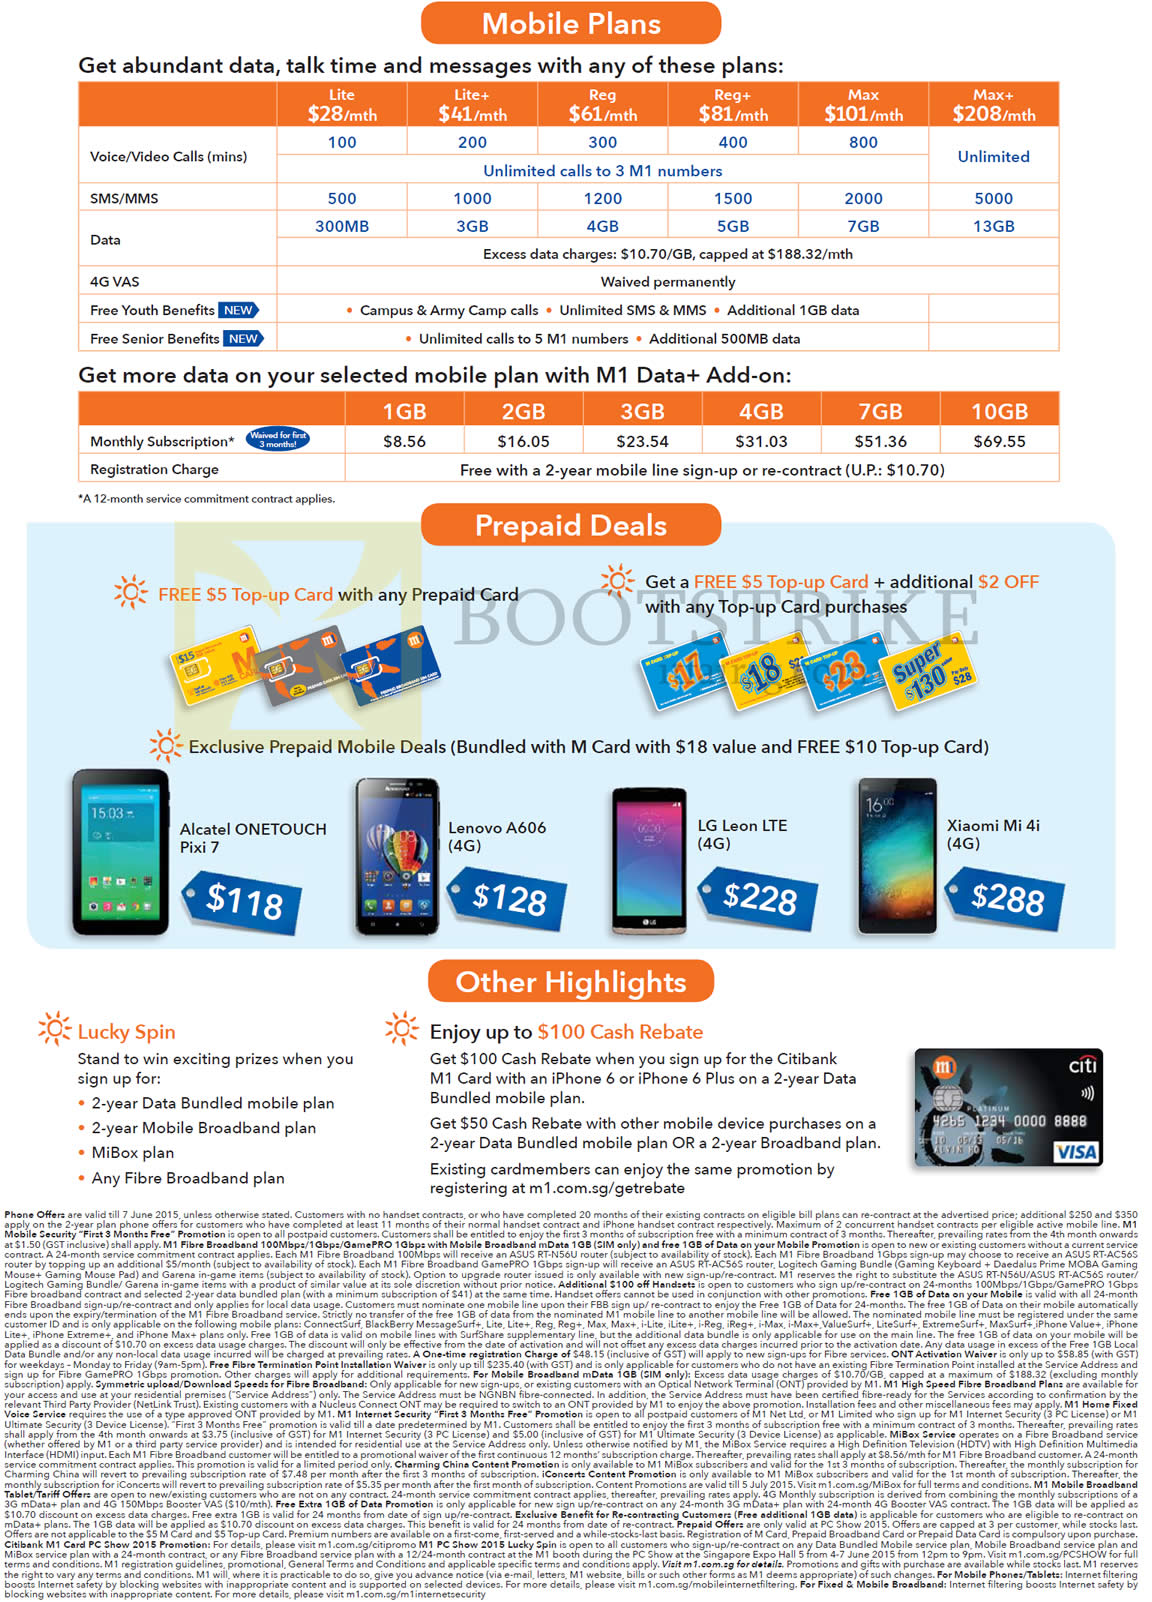 PC SHOW 2015 price list image brochure of M1 Mobile Plans, Prepaid Deals, Lucky Spin, Cash Rebate